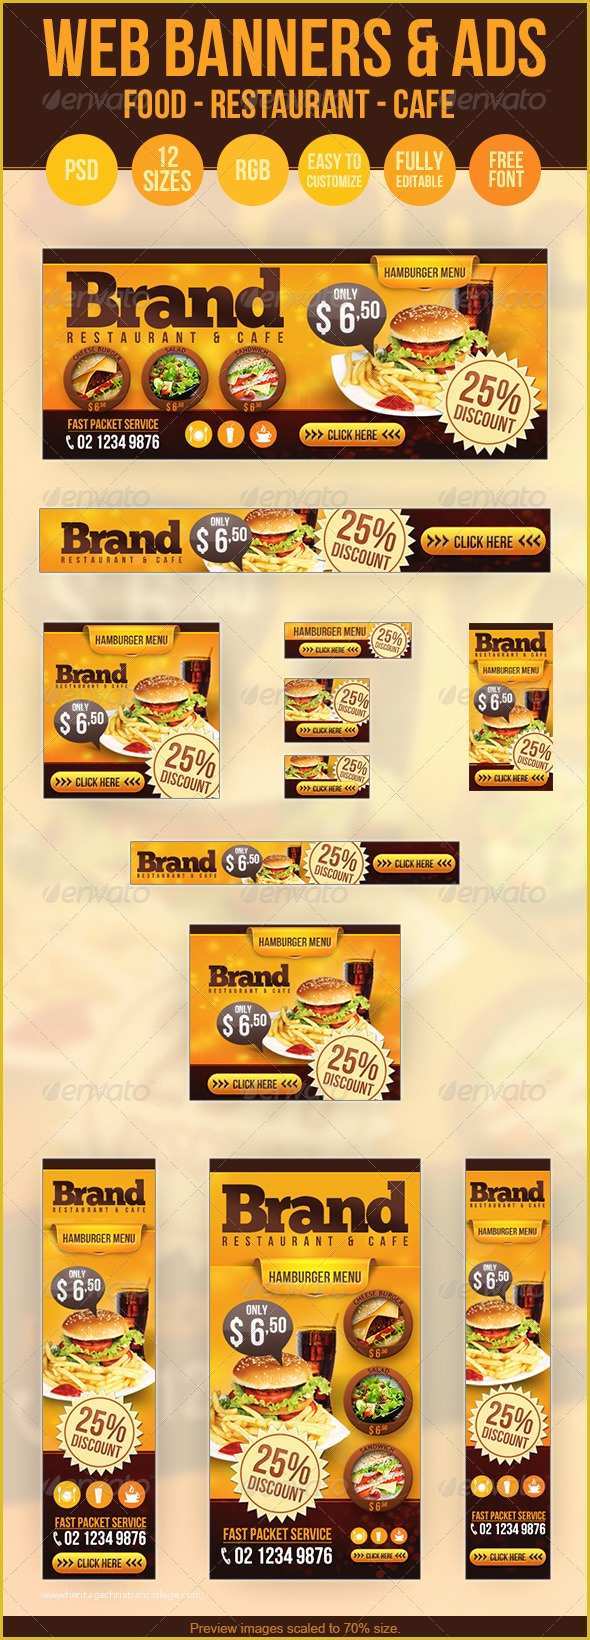 Food Banner Design Template Free Of Food Web Banners &amp; Advertise Psd Templates by Hsynkyc